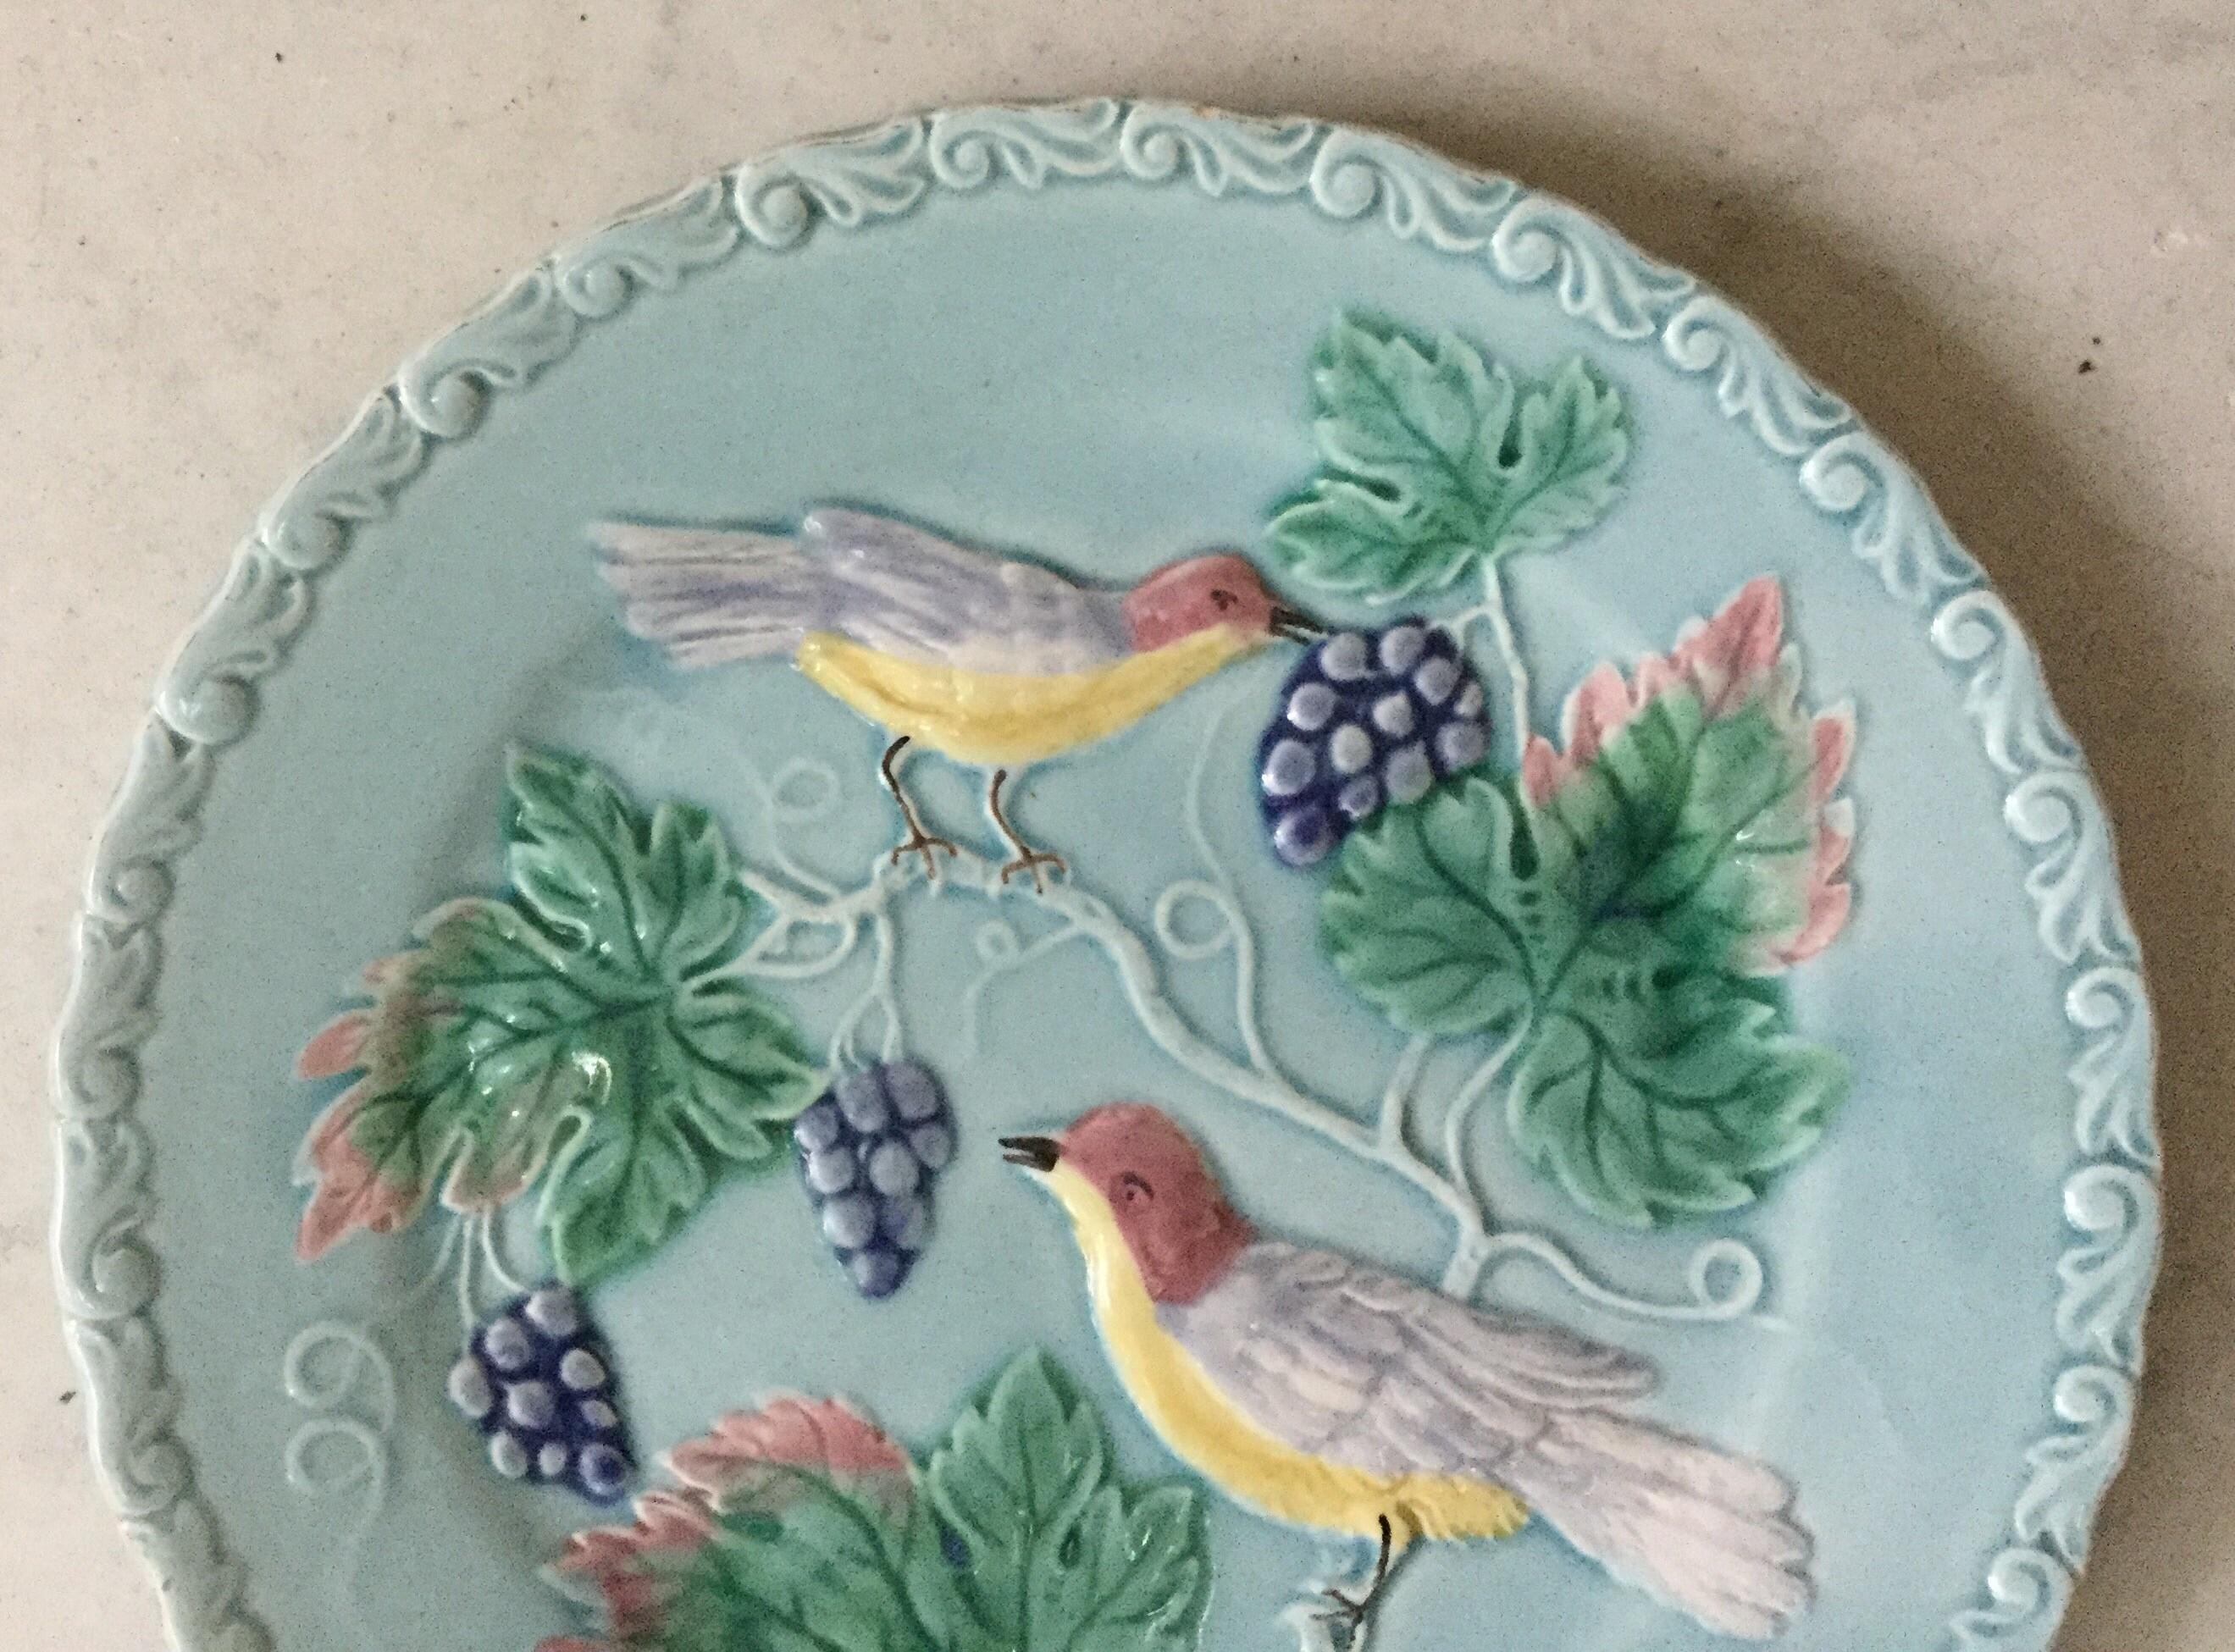 German Majolica birds and grapes plate, circa 1900.
2 plates available.